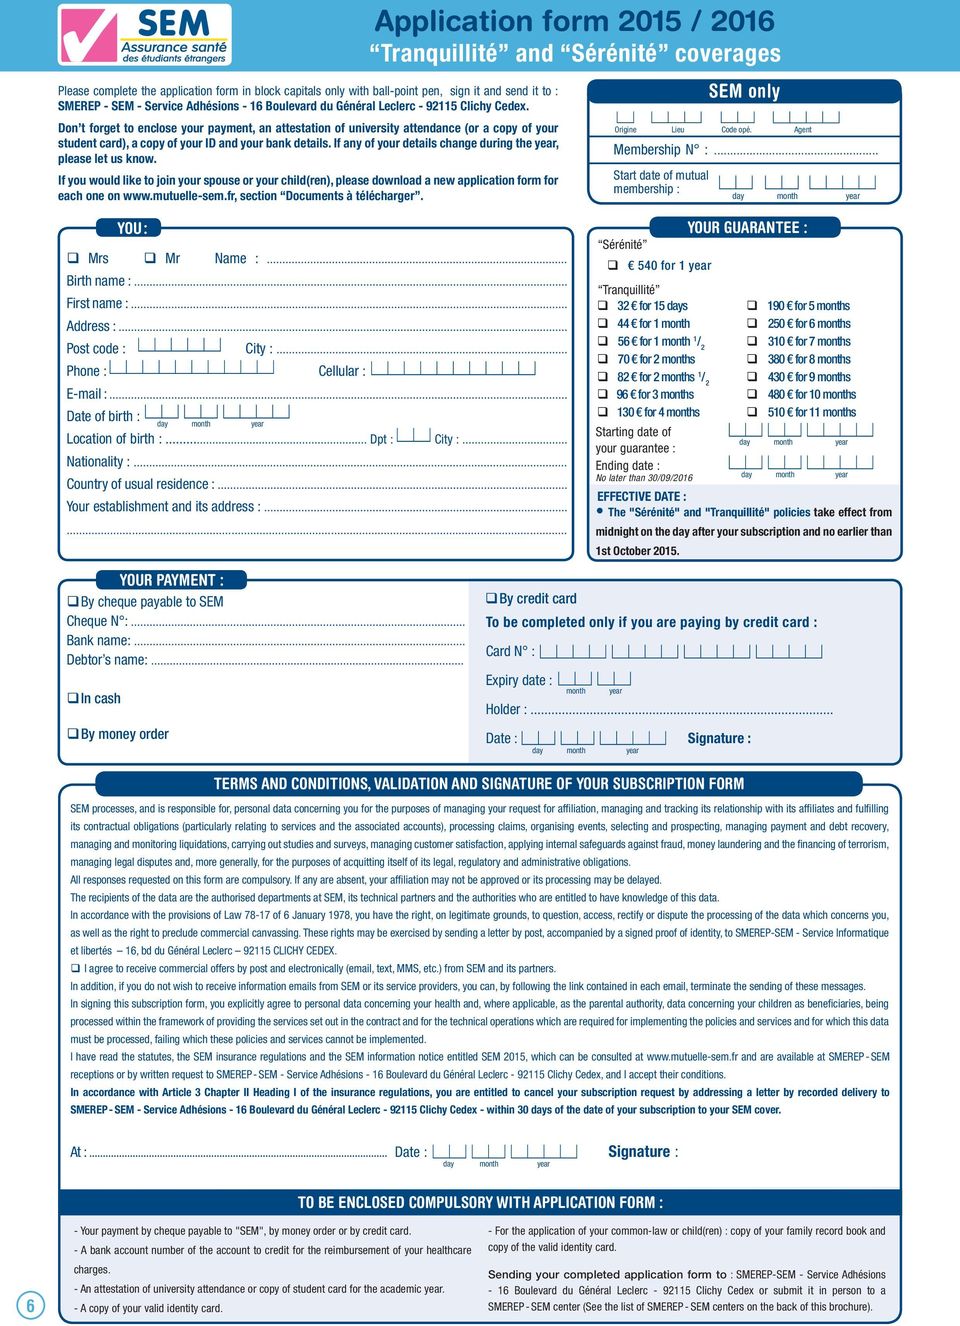 If any of your details change during the year, please let us know. If you would like to join your spouse or your child(ren), please download a new application form for each one on www.mutuelle-sem.